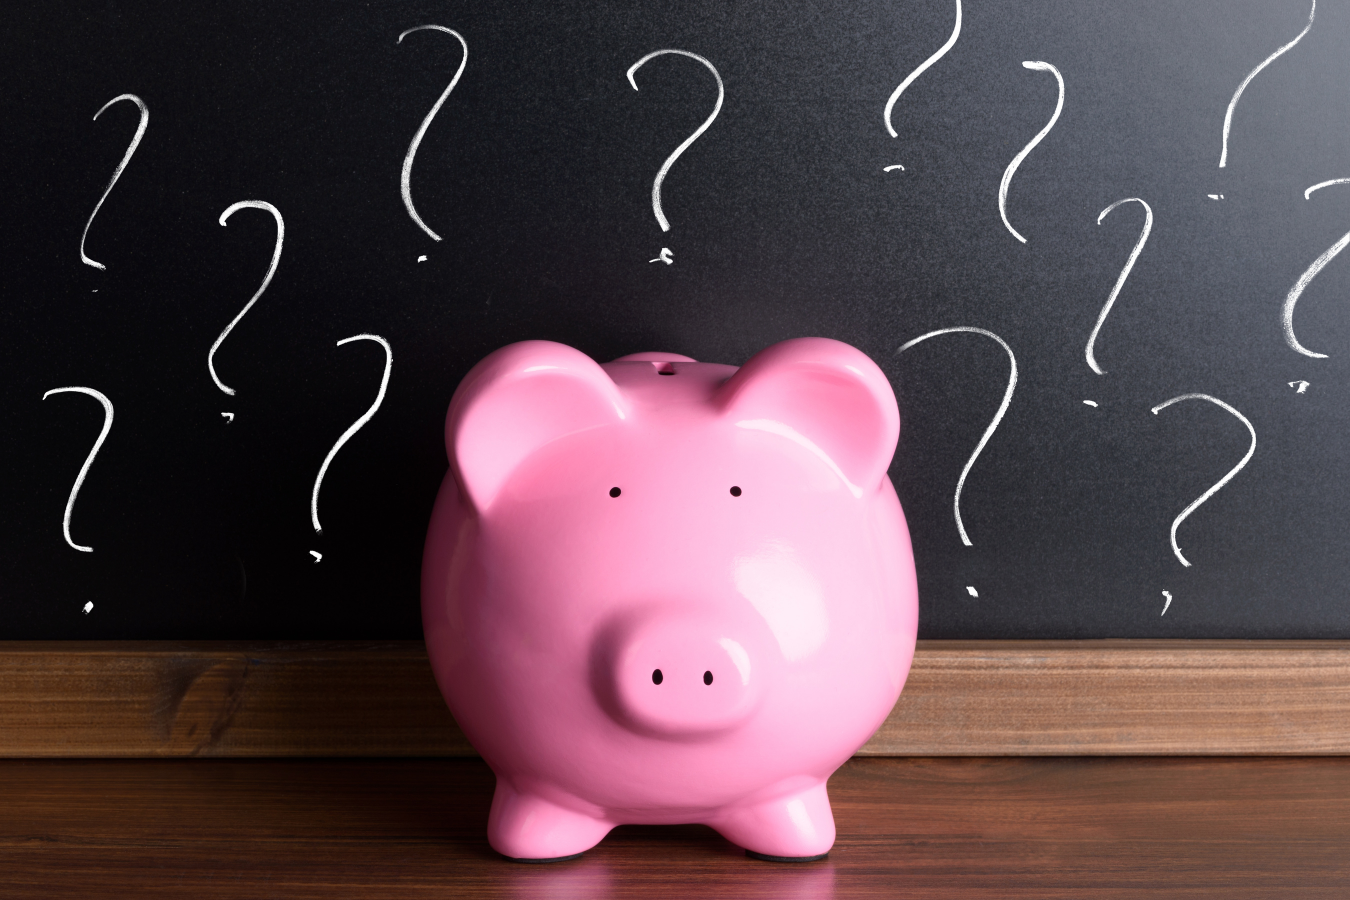 Piggy bank surrounded by question marks: when the economy is uncertain, using flex talent can help